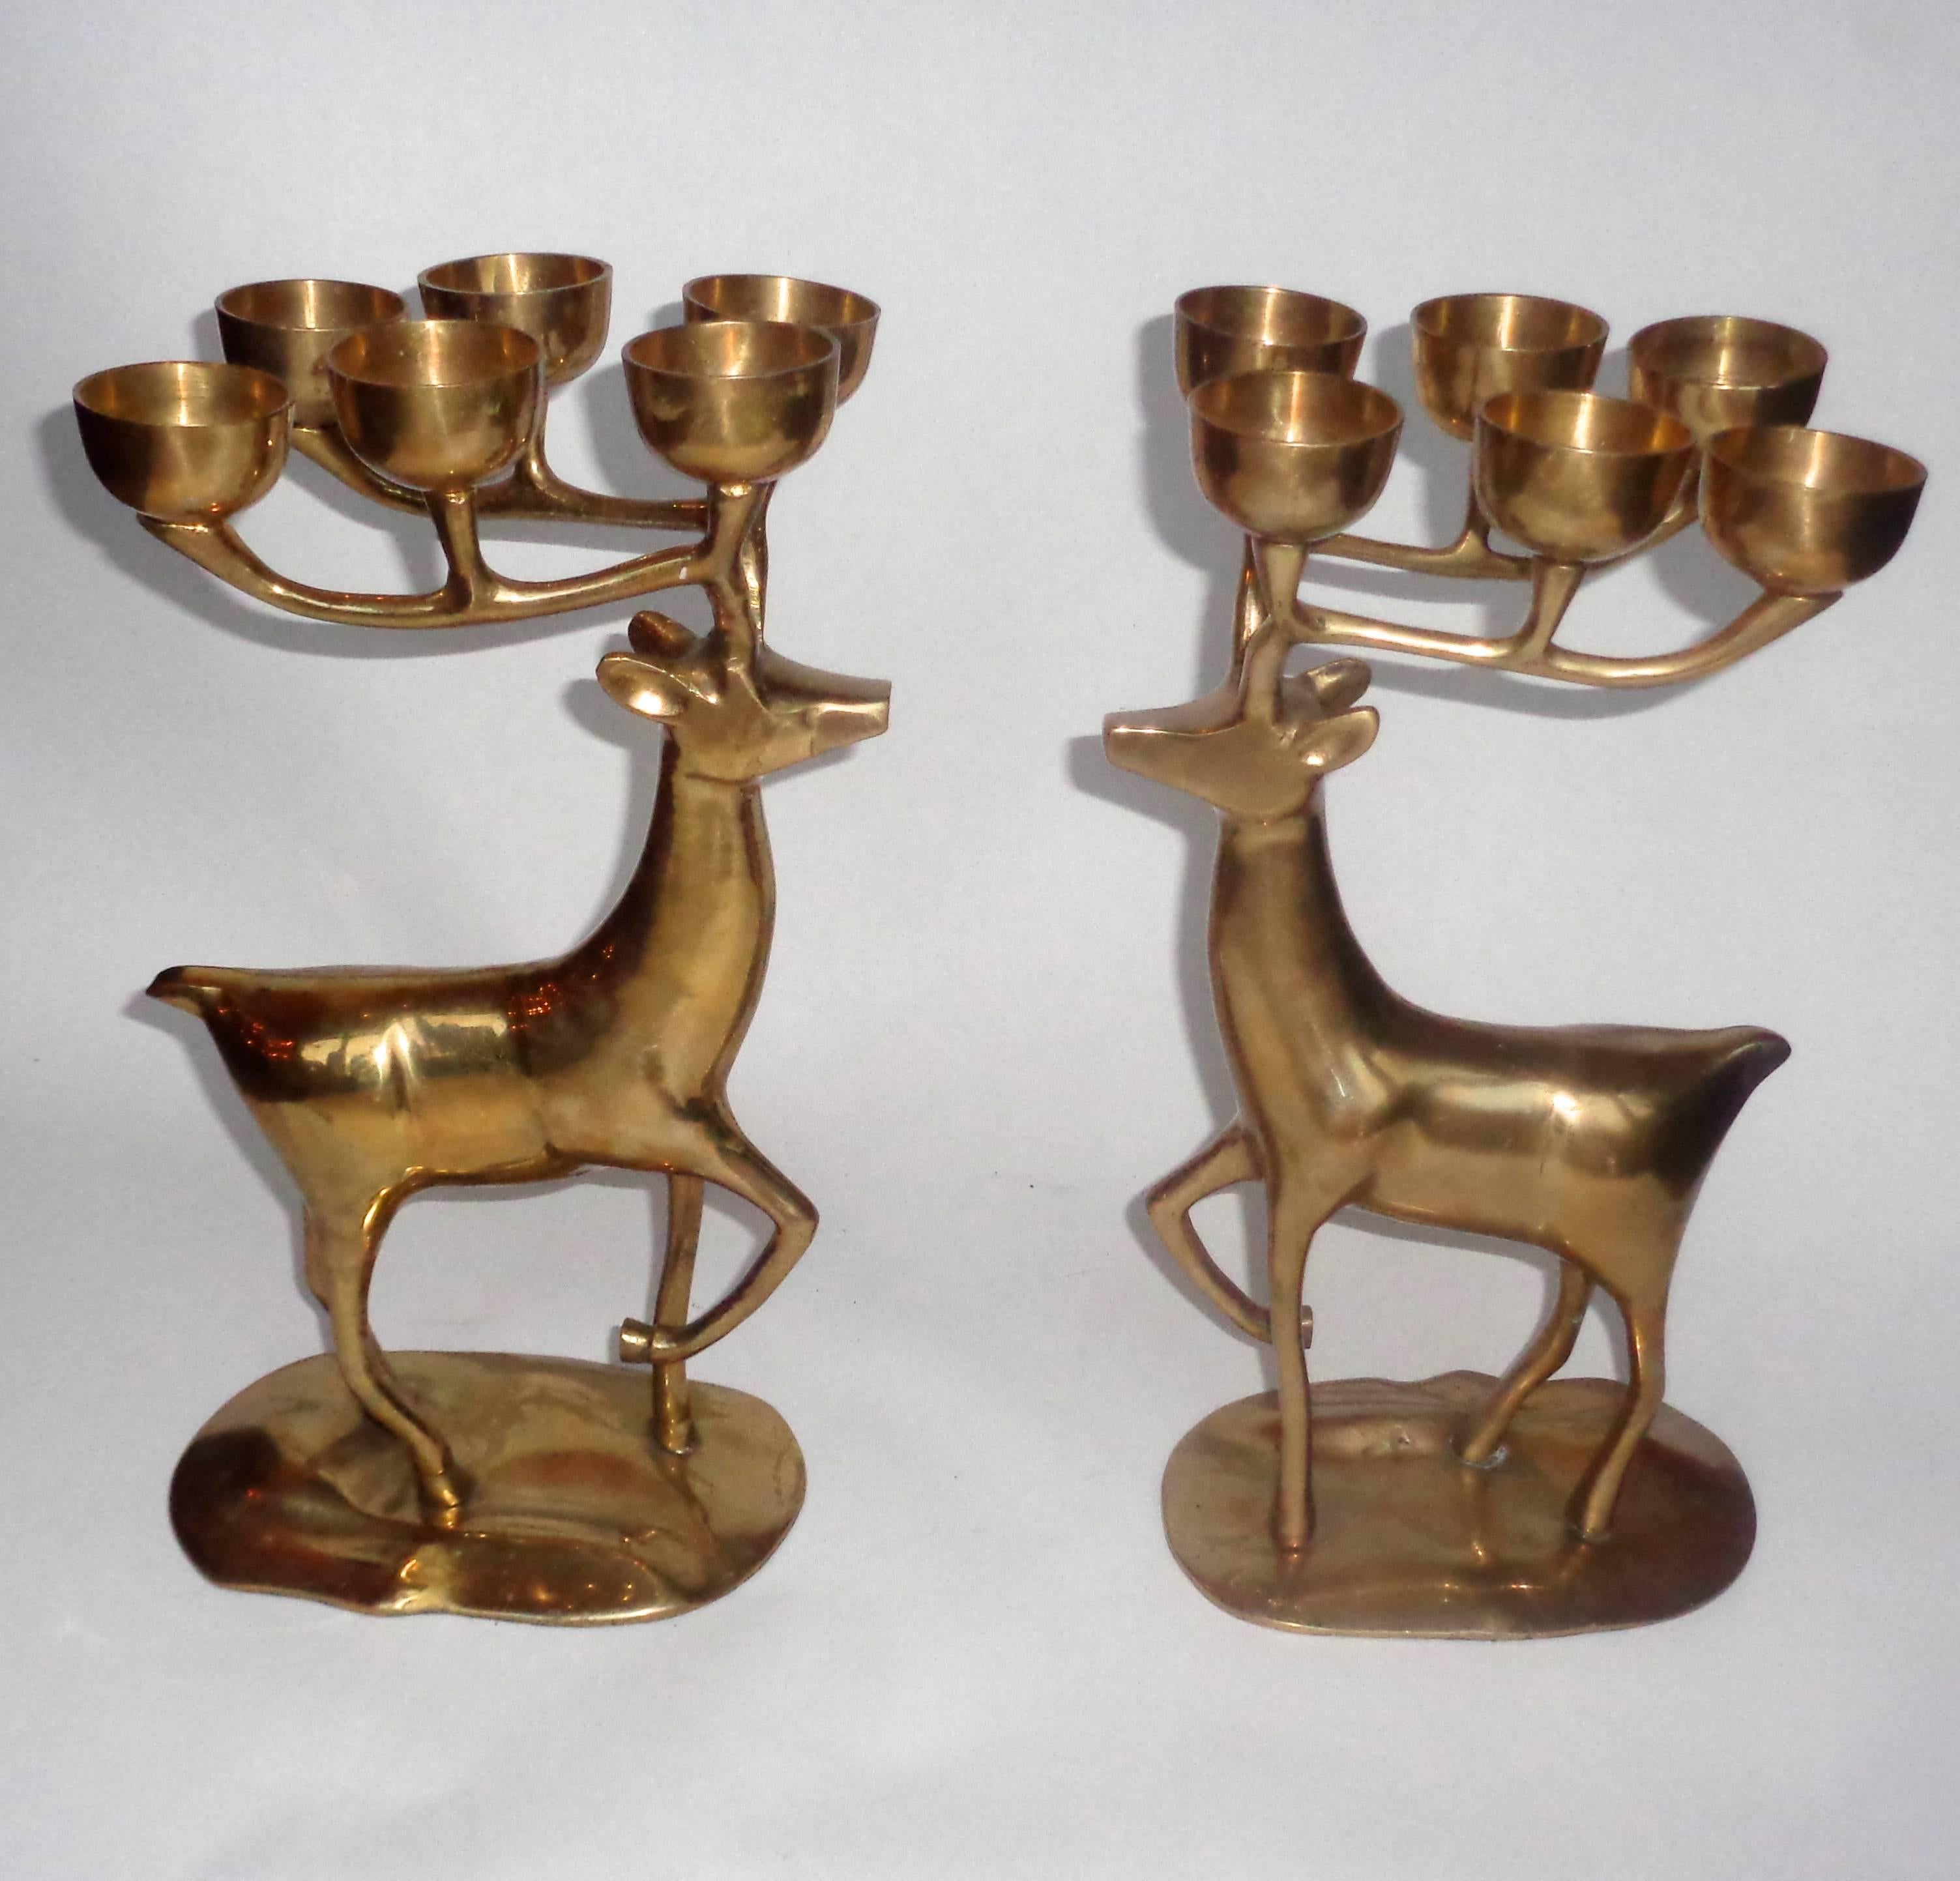 This large pair would be a wonderful feature on the holiday dinner table, but even out of the festive season they are a very decorative set of candelabra's.
They both carry 6 candle holders, with felt on the bottom of the base.
They have a